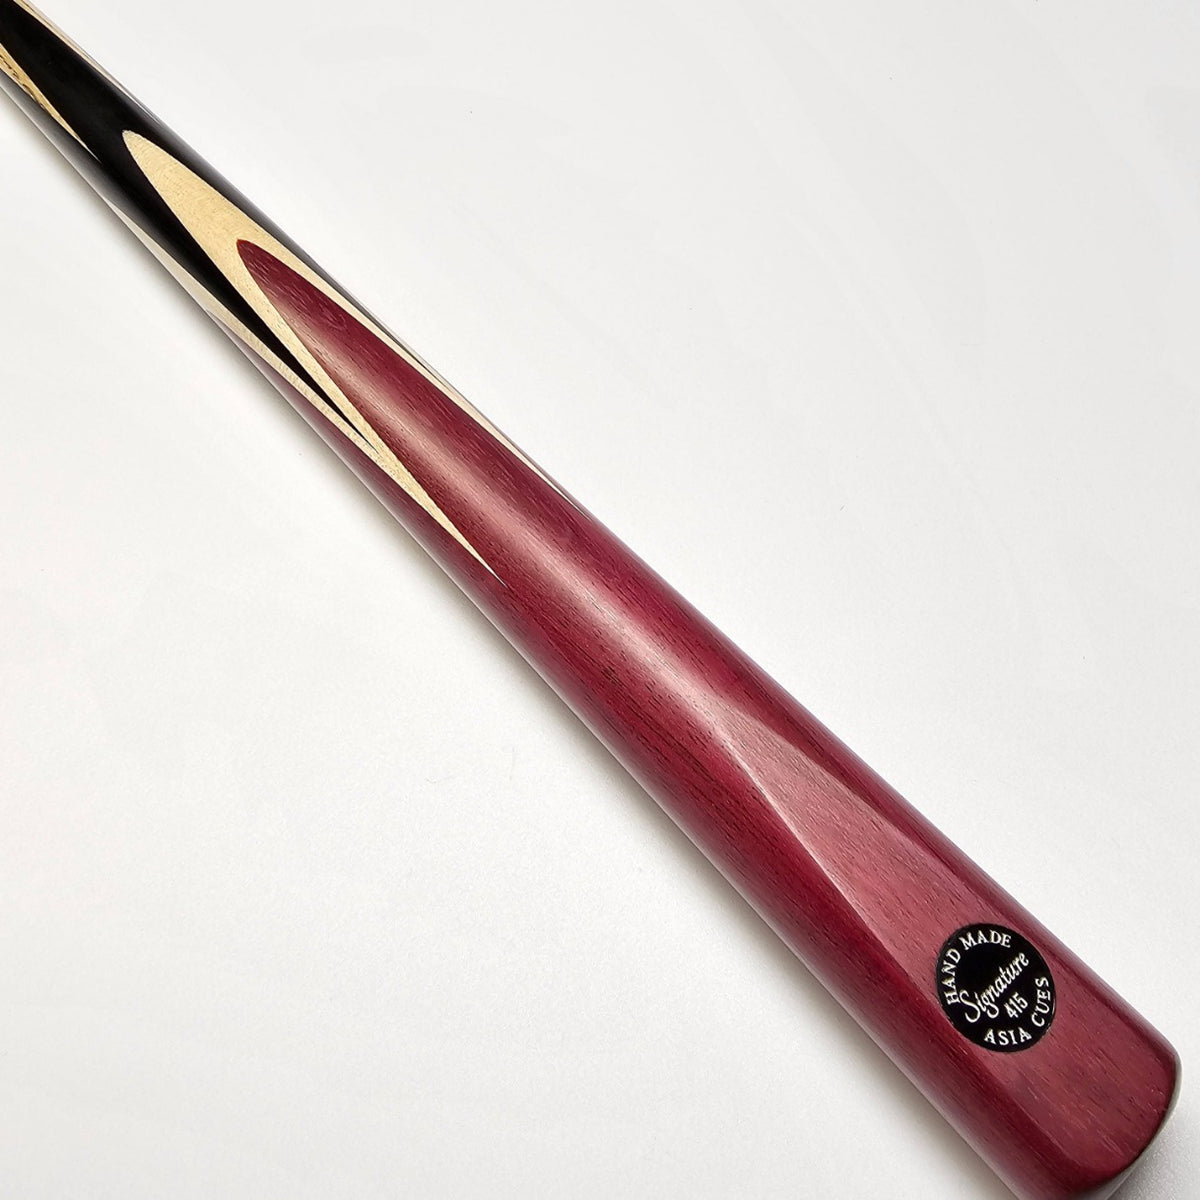 Asia Cues Signature One Piece Snooker Cue  Handmade Ebony Butt with 4 lower splices of Purple Heart and 4 veneers of Thick Birdseye Maple. Butt View